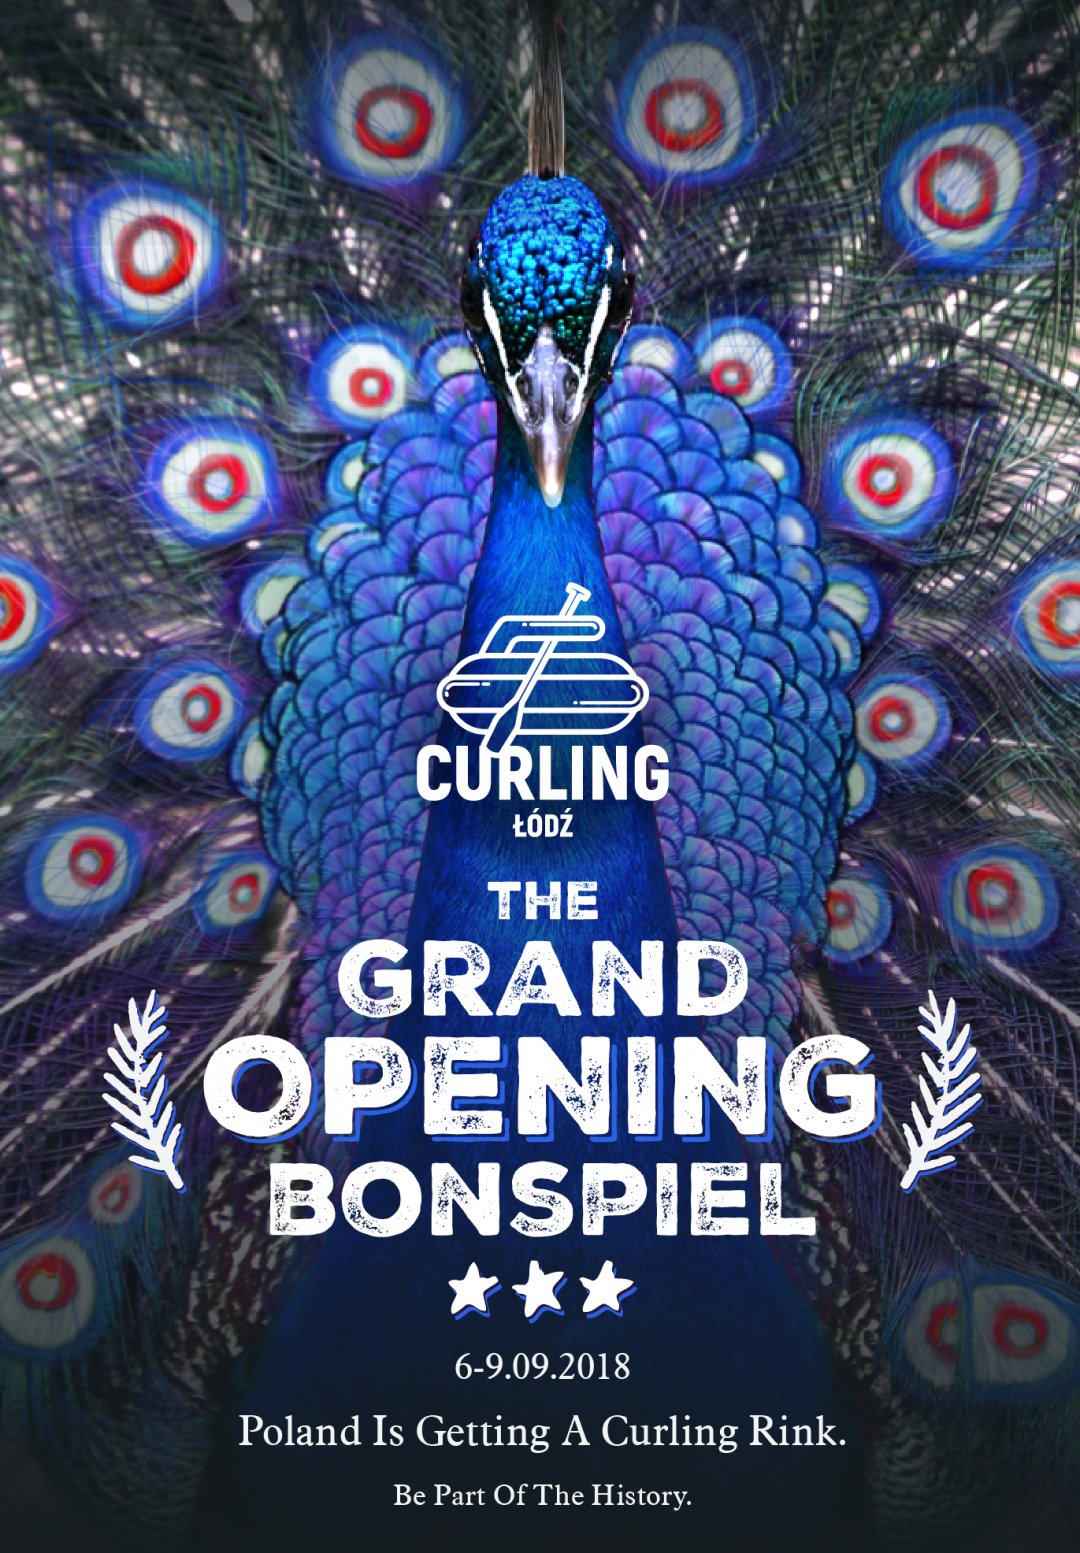 The Grand Opening Bonspiel 2018